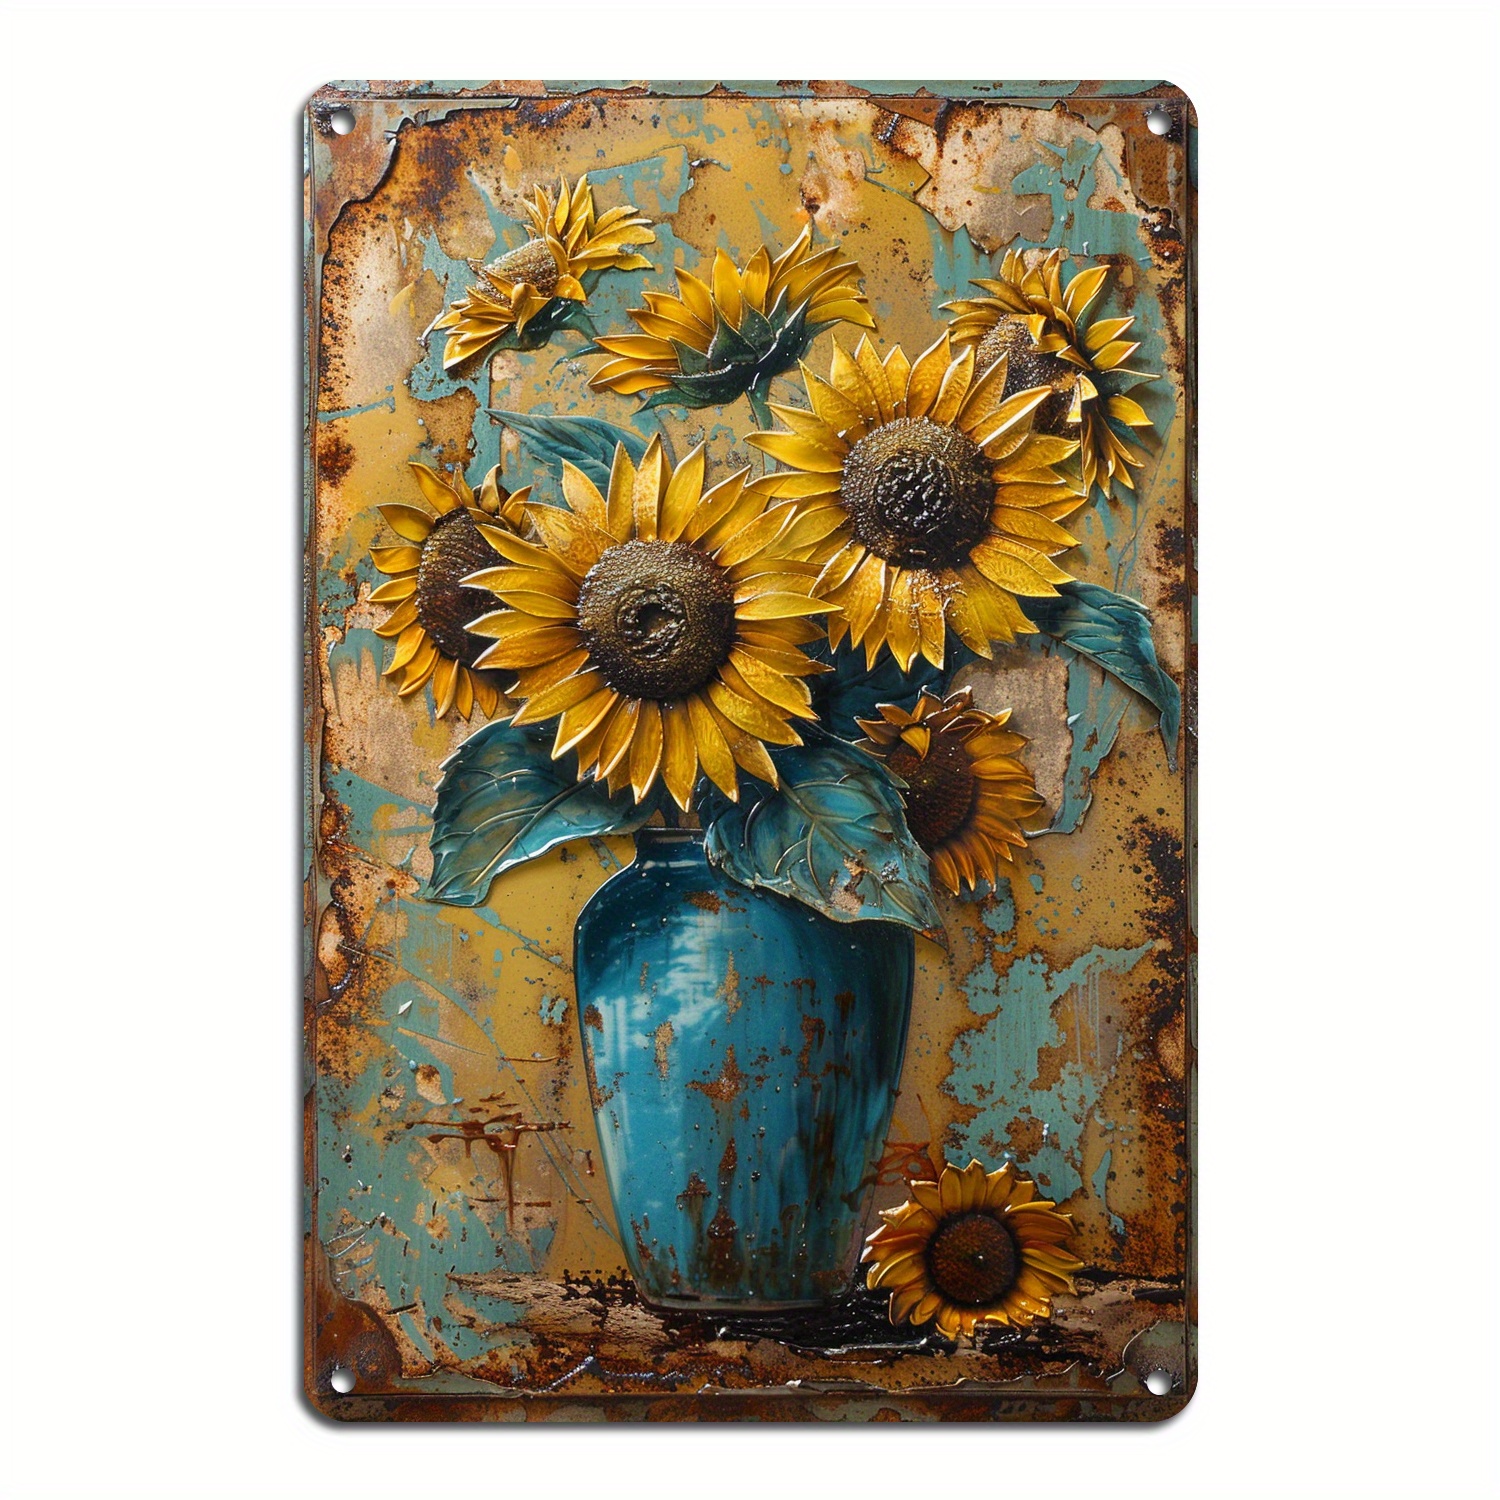 

8x12inch Yellow Sunflower Vintage Metal Tin Sign Farmhouse Kitchen Wall Country Home Decor Coffee Bar Signs Gifts Garden Decoration